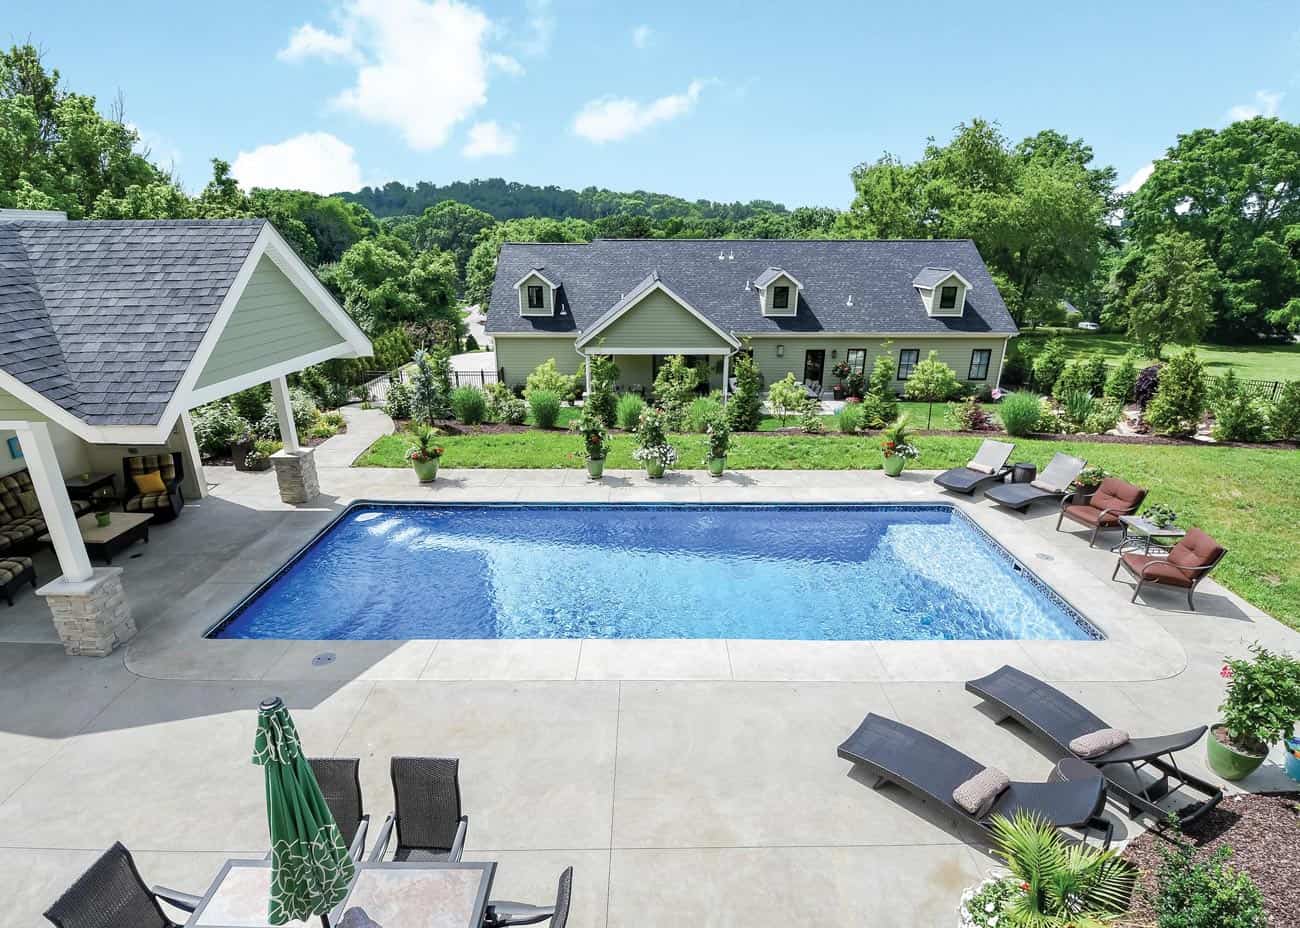 A beautiful in-ground pool sits in the backyard of a nice house. There are pool features that boost pool enjoyment like a tanning ledge. The pool has a patio with furniture arranged nicely.